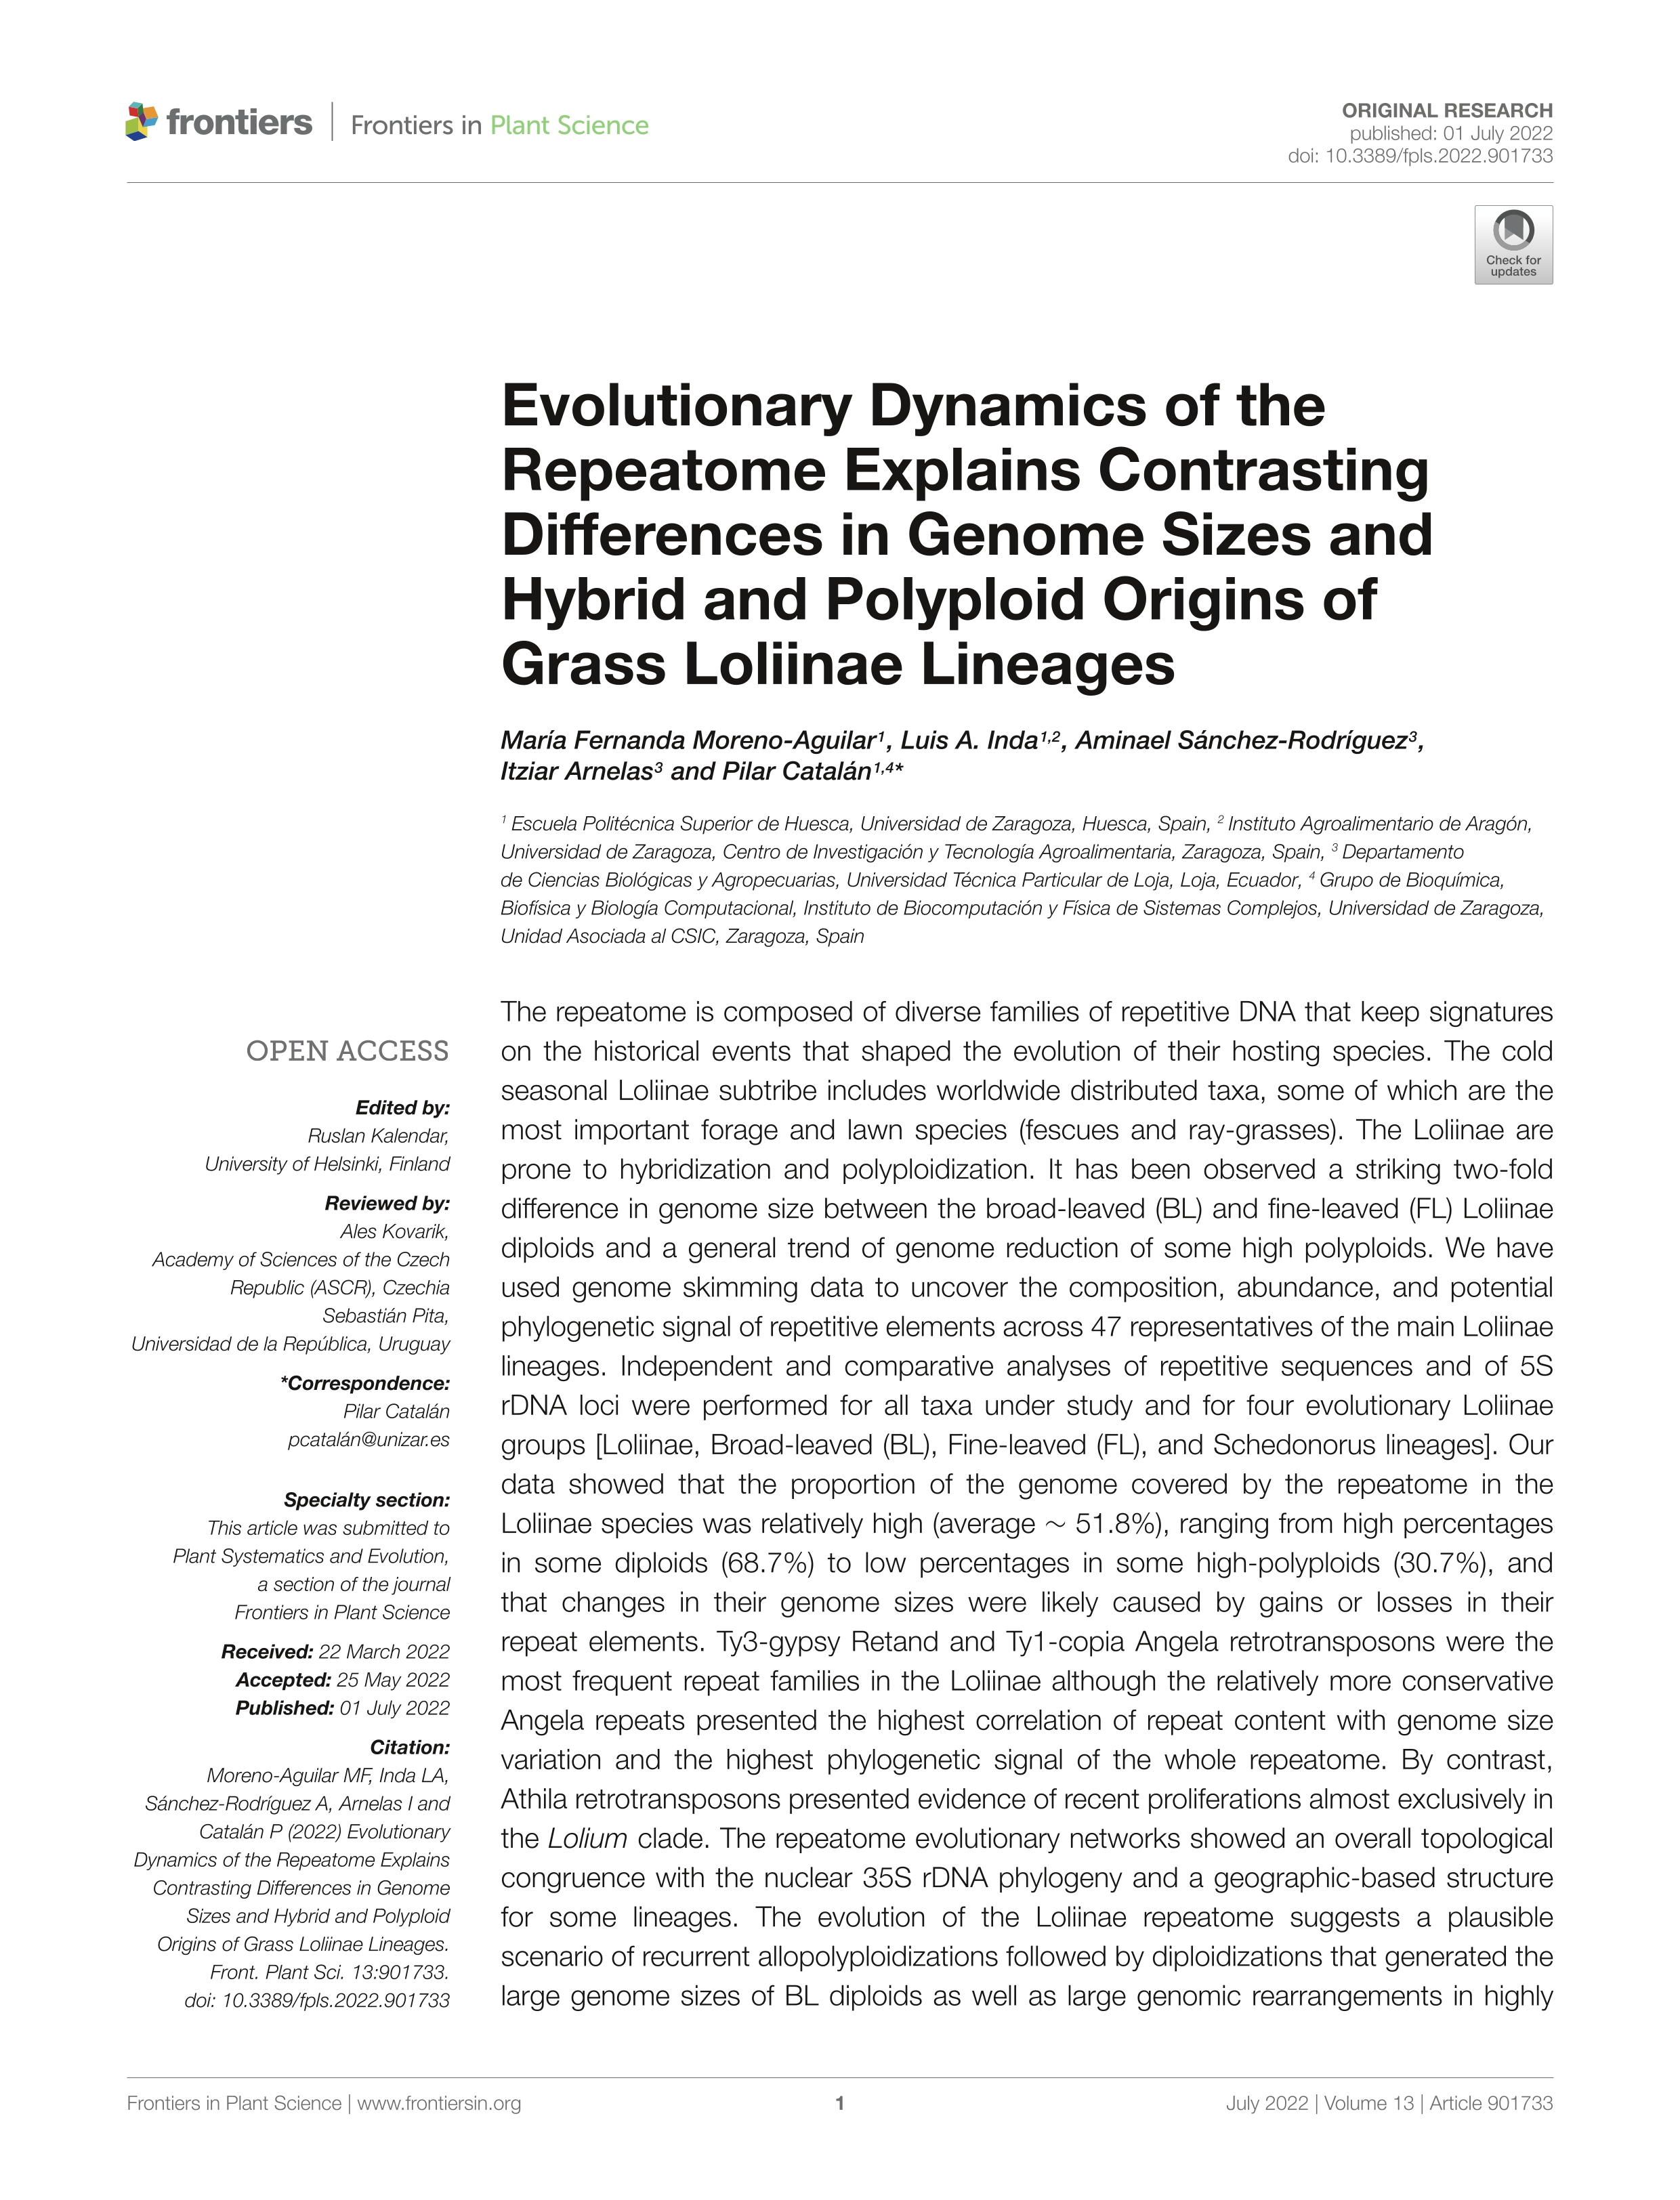 Evolutionary dynamics of the repeatome explains contrasting differences in genome sizes and hybrid and polyploid origins of grass loliinae lineages